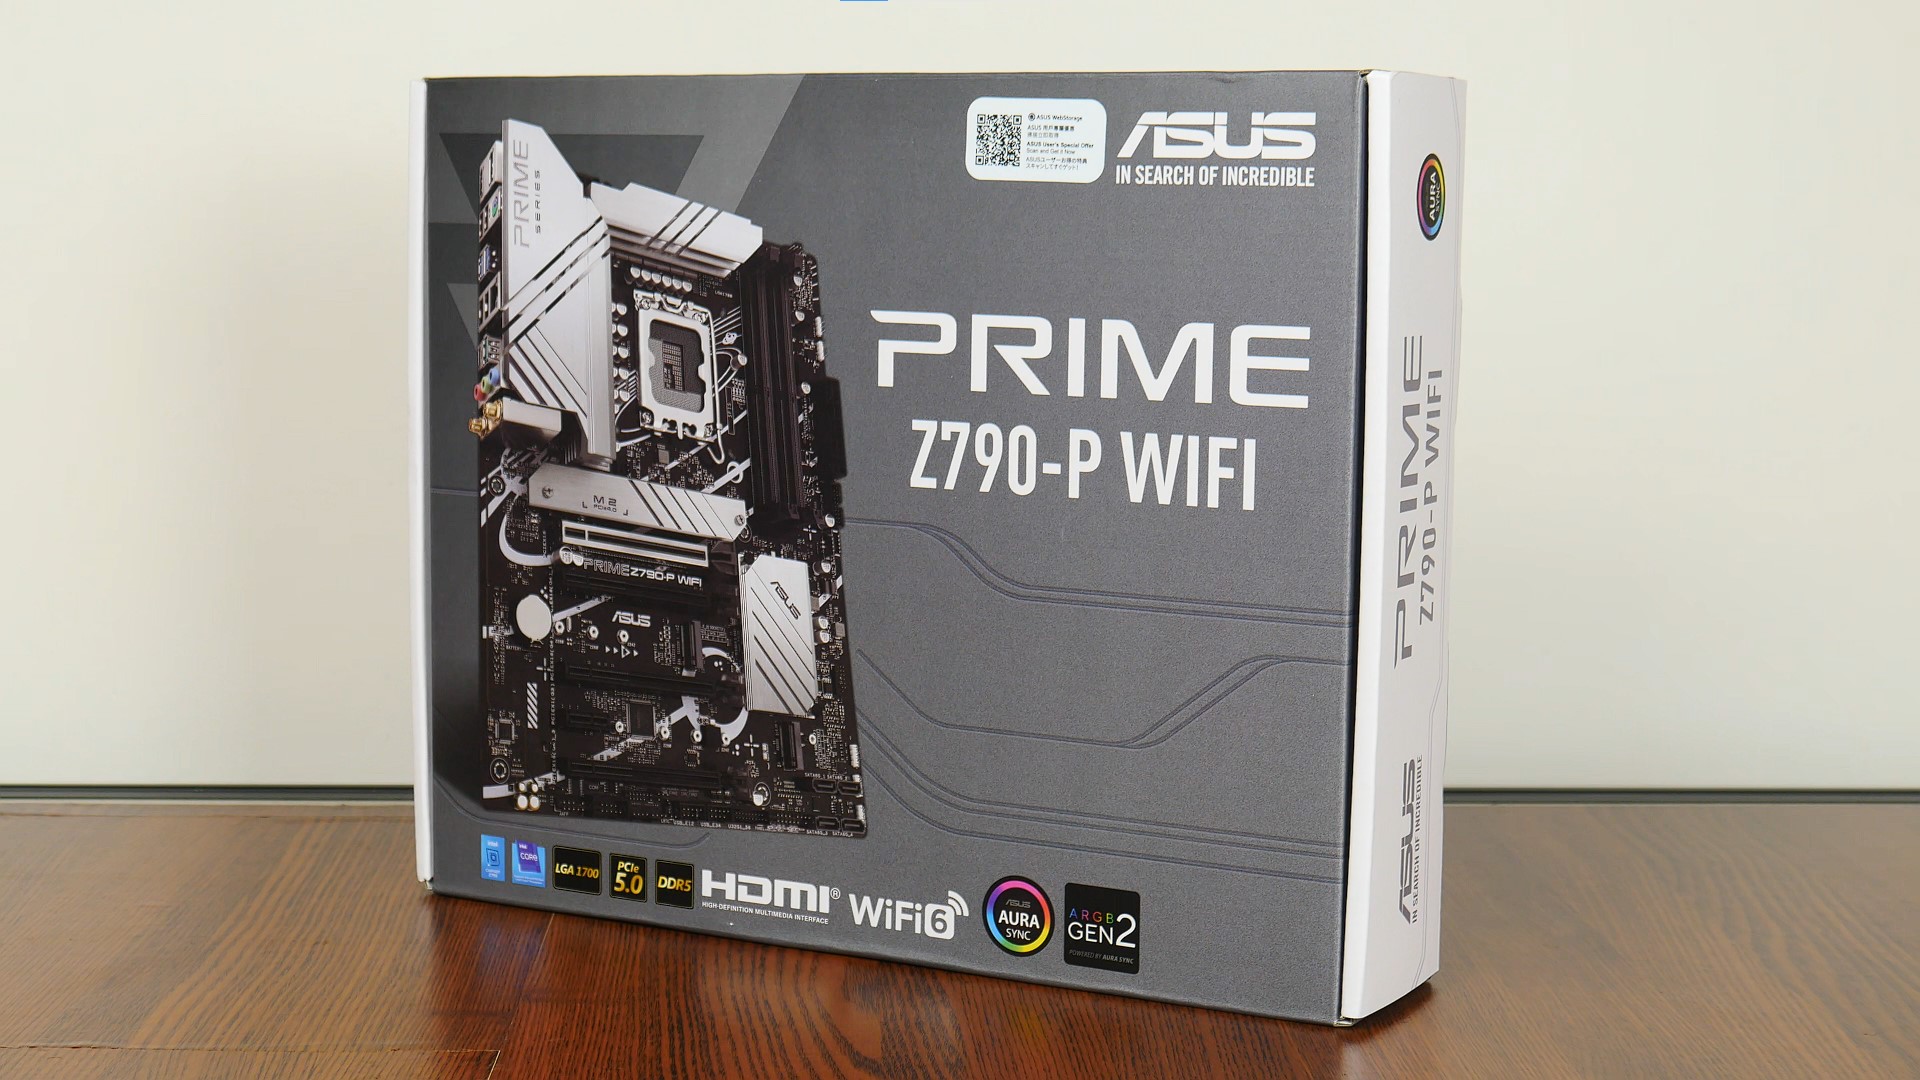 ASUS PRIME Z790-P WIFI Packaging (Front)